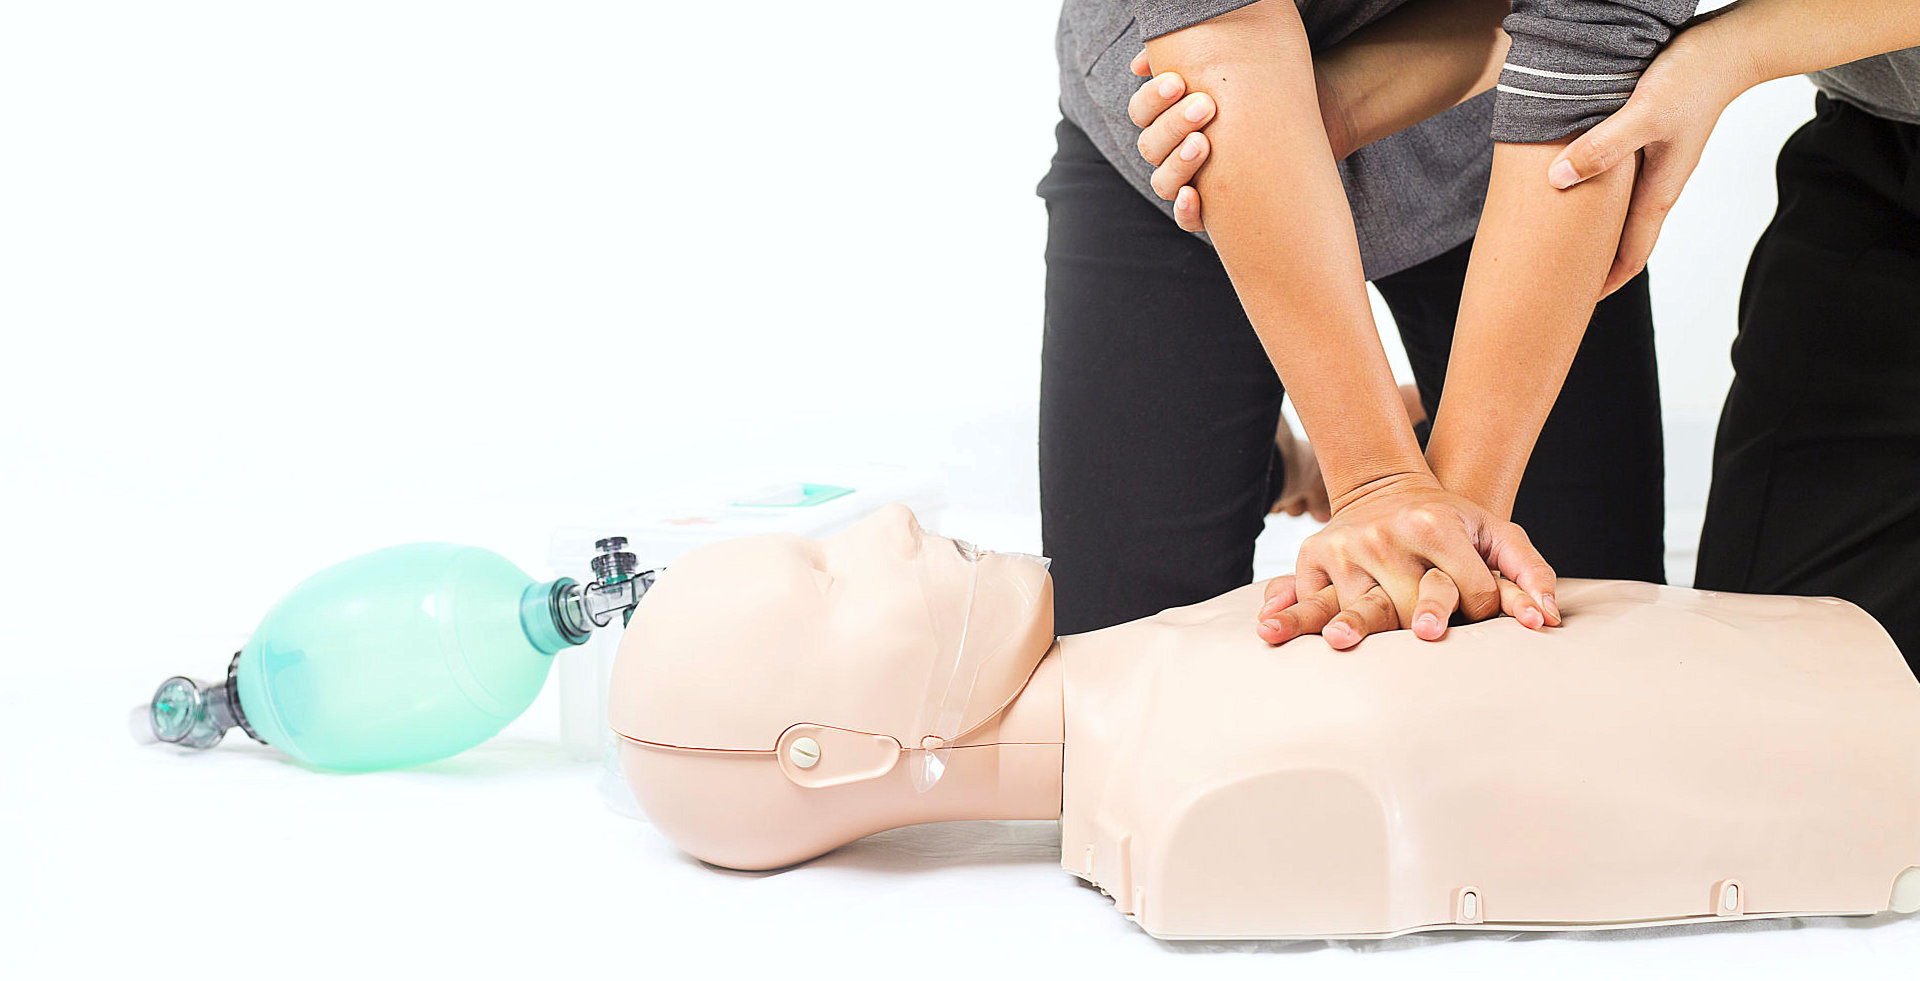 basic cpr applied to a dummy concept